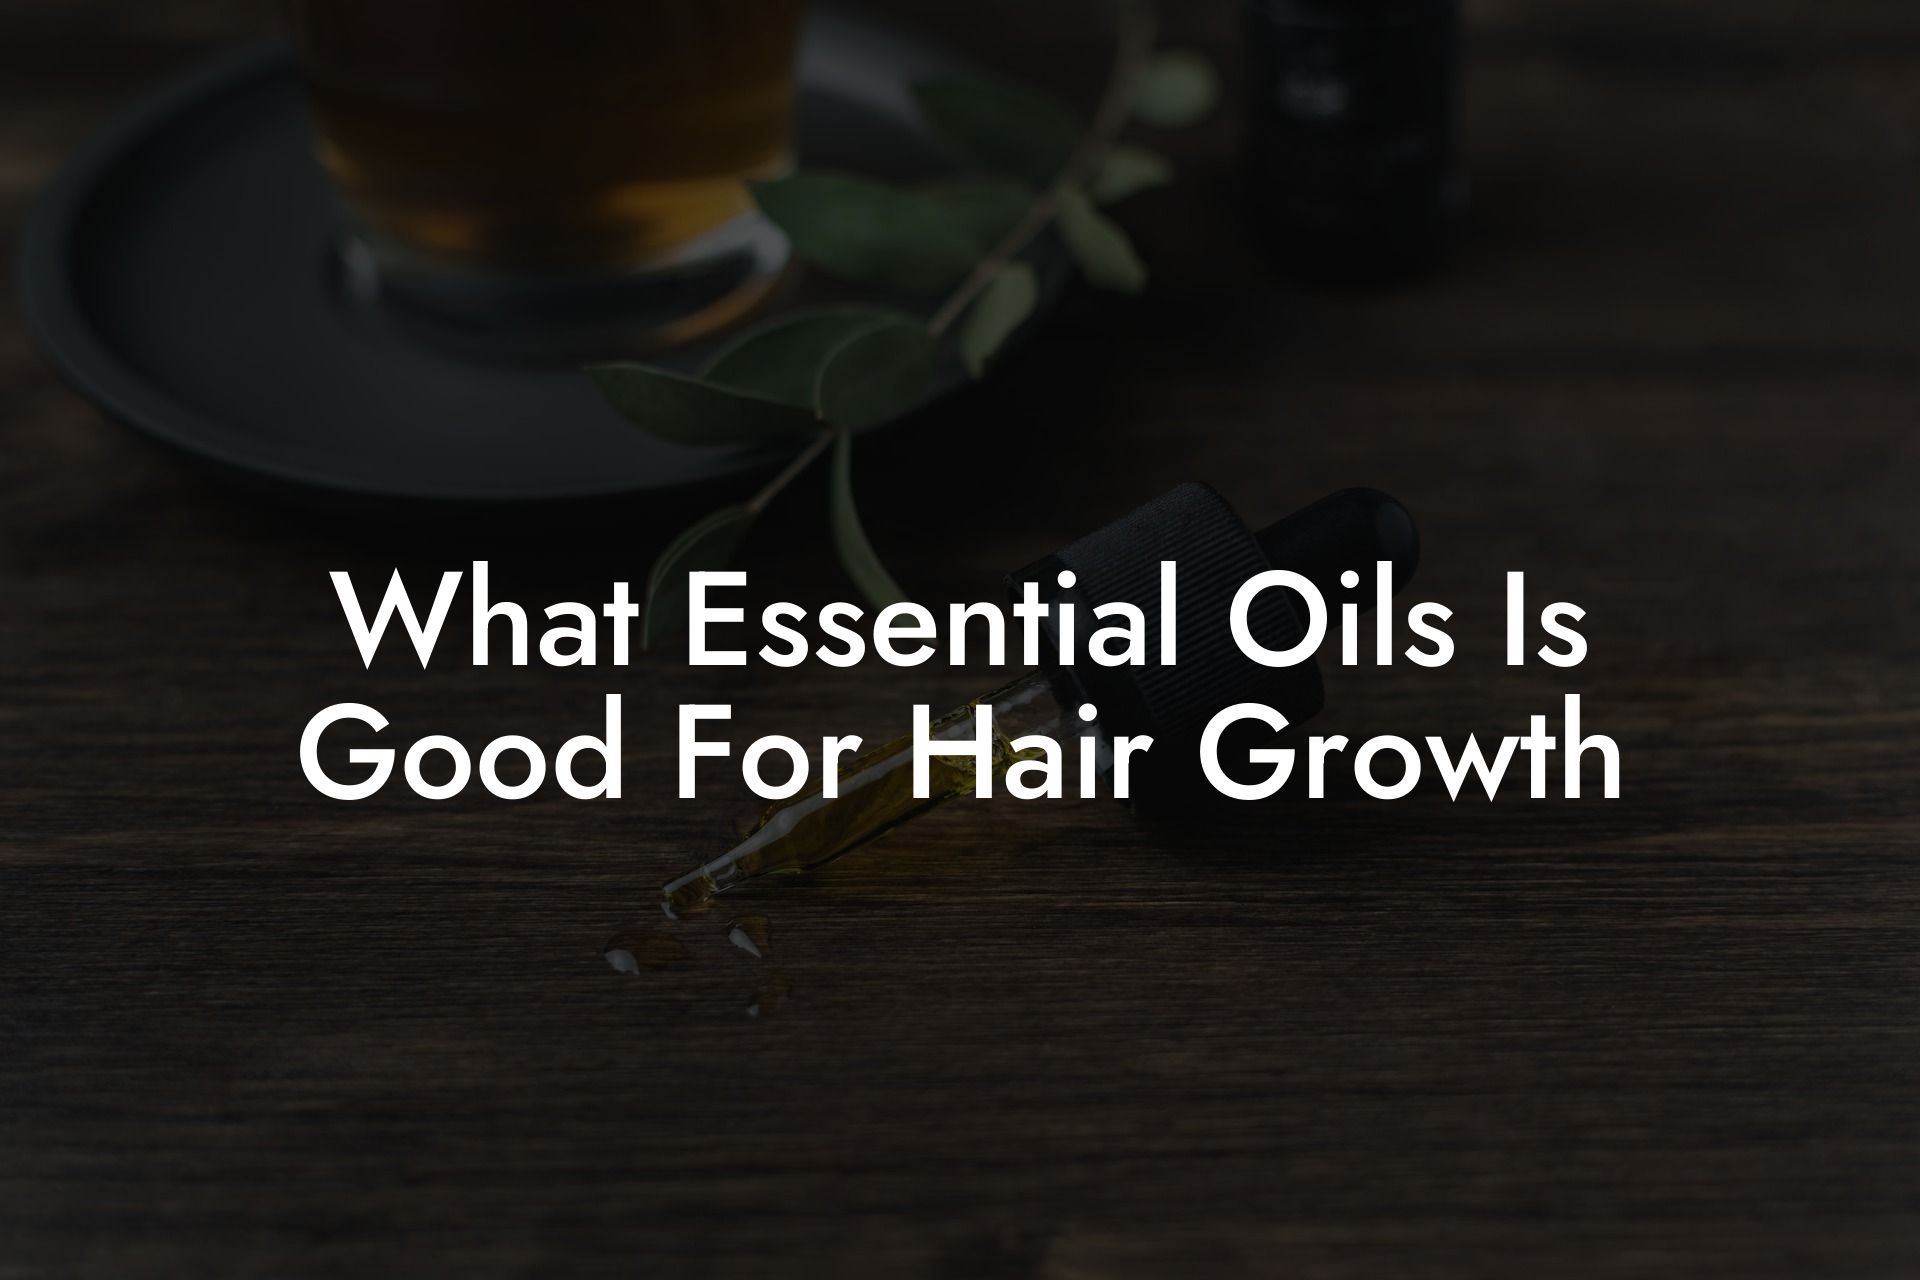 What Essential Oils Is Good For Hair Growth